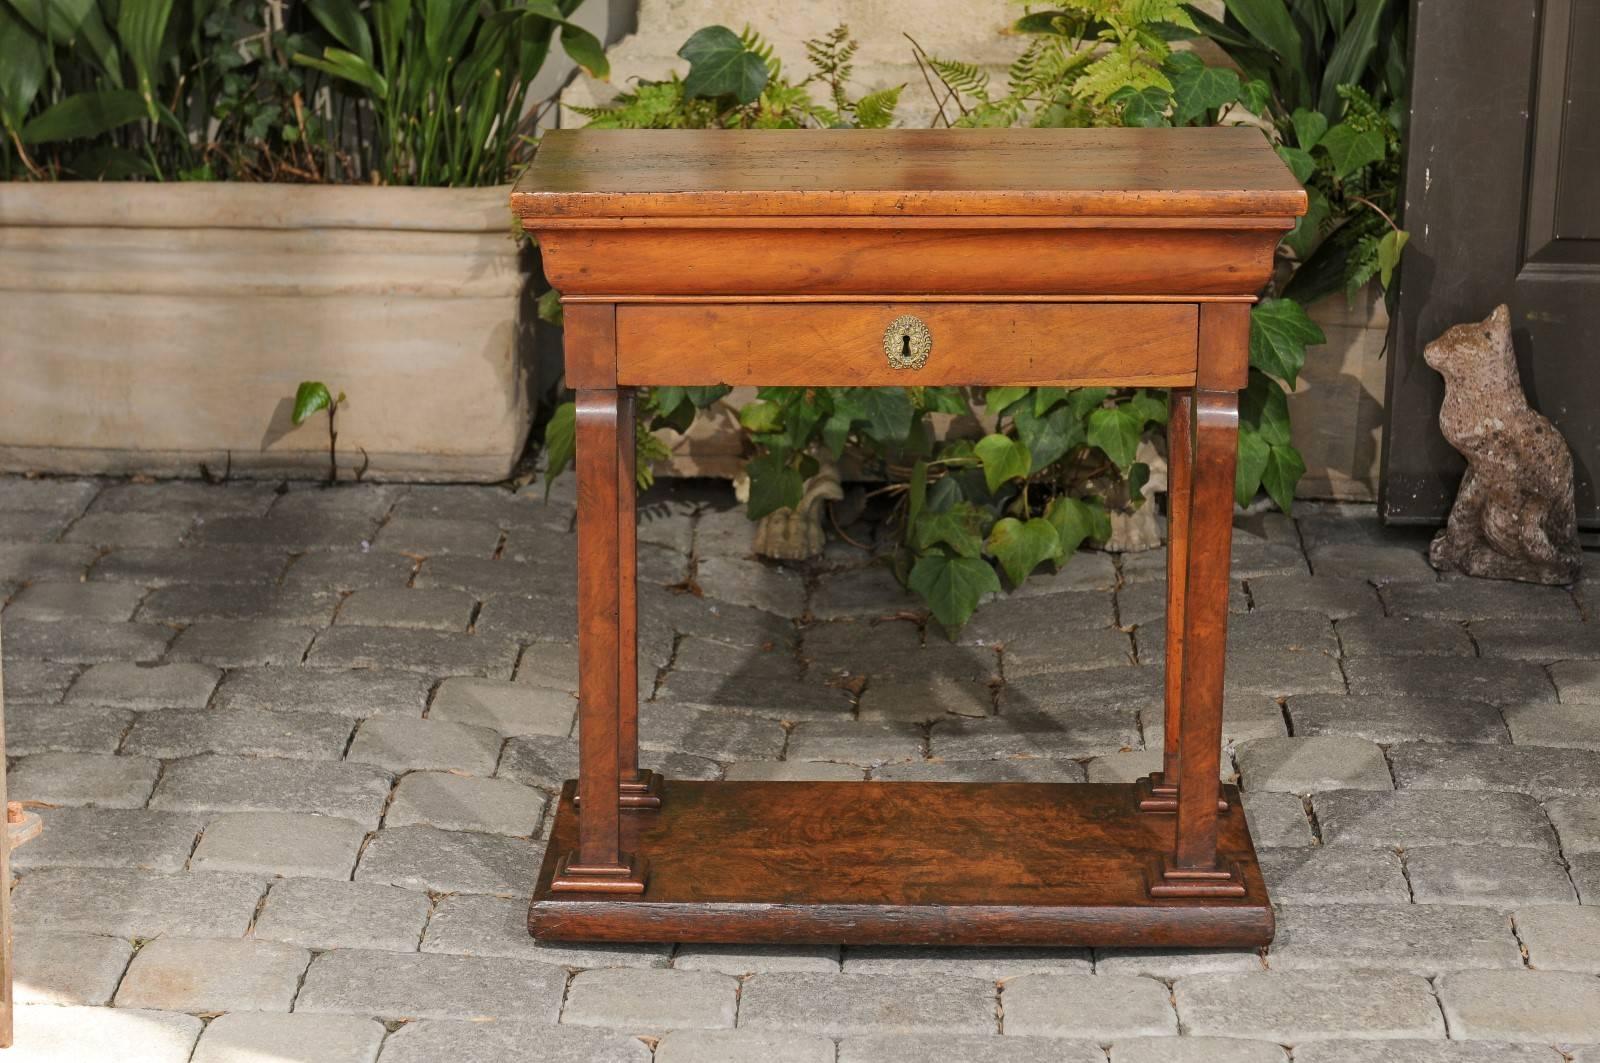 A French period Louis-Philippe walnut side table from the mid-19th century with single drawer, scrolled legs and lower shelf. This French side table features a nicely weathered rectangular top sitting above a delicately curved apron, surmounting a